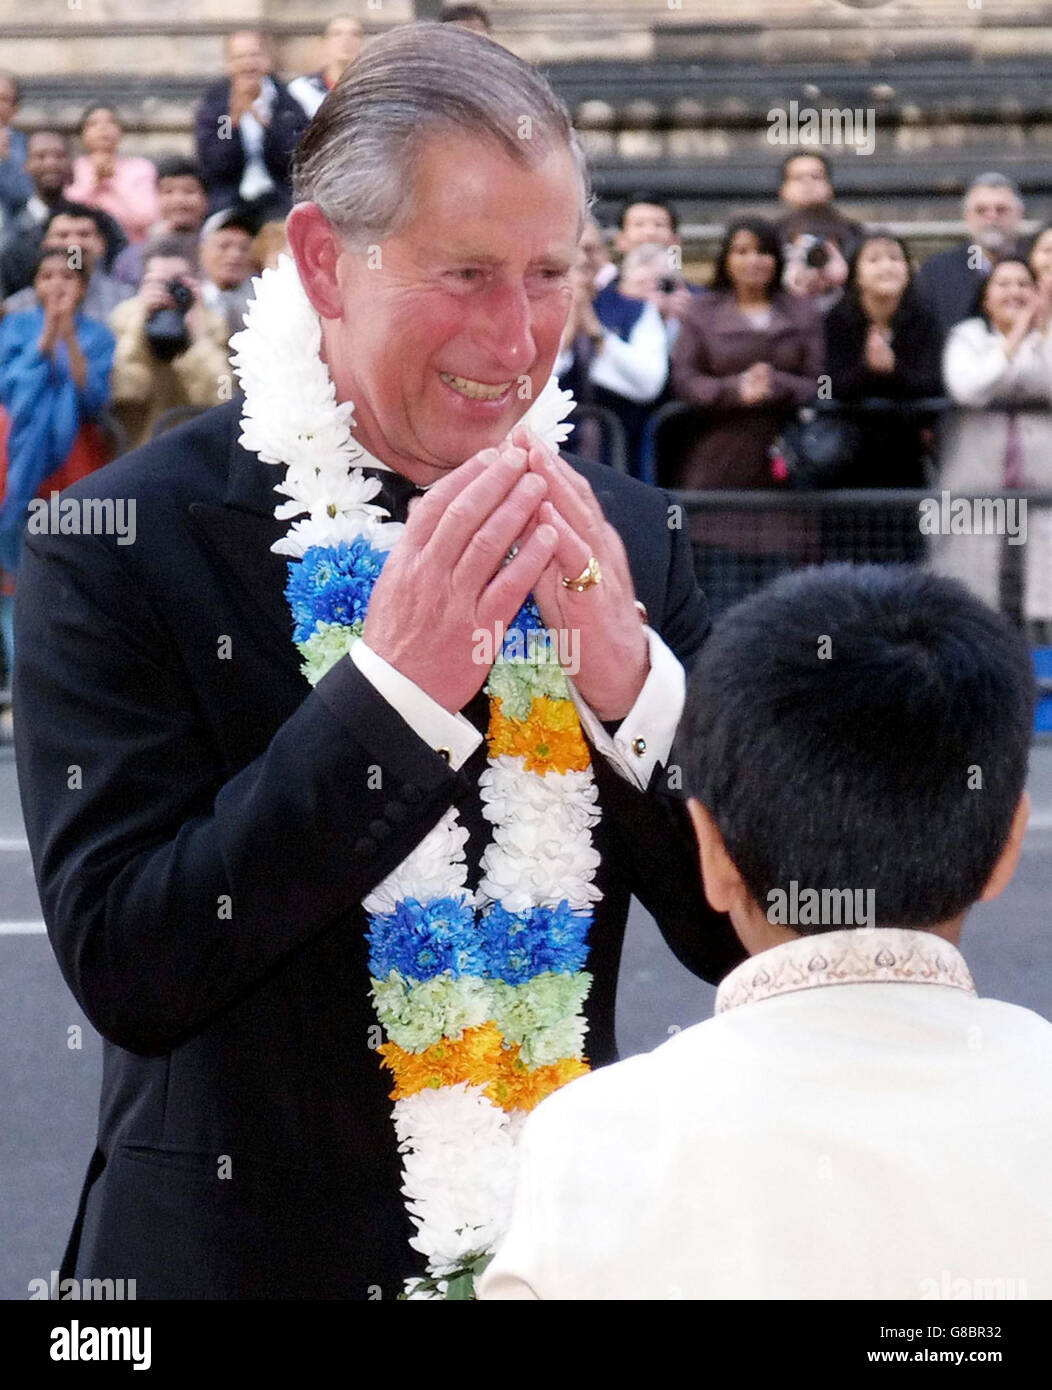 The Prince of Wales thanks a young boy for the garlands he placed round his neck on her arrival. The Prince and the Duchess of Cornwall were adorned with the garlands as they embraced the customs of a traditional Indian welcome when they arrived to see the IMAX film Mystic India. Stock Photo